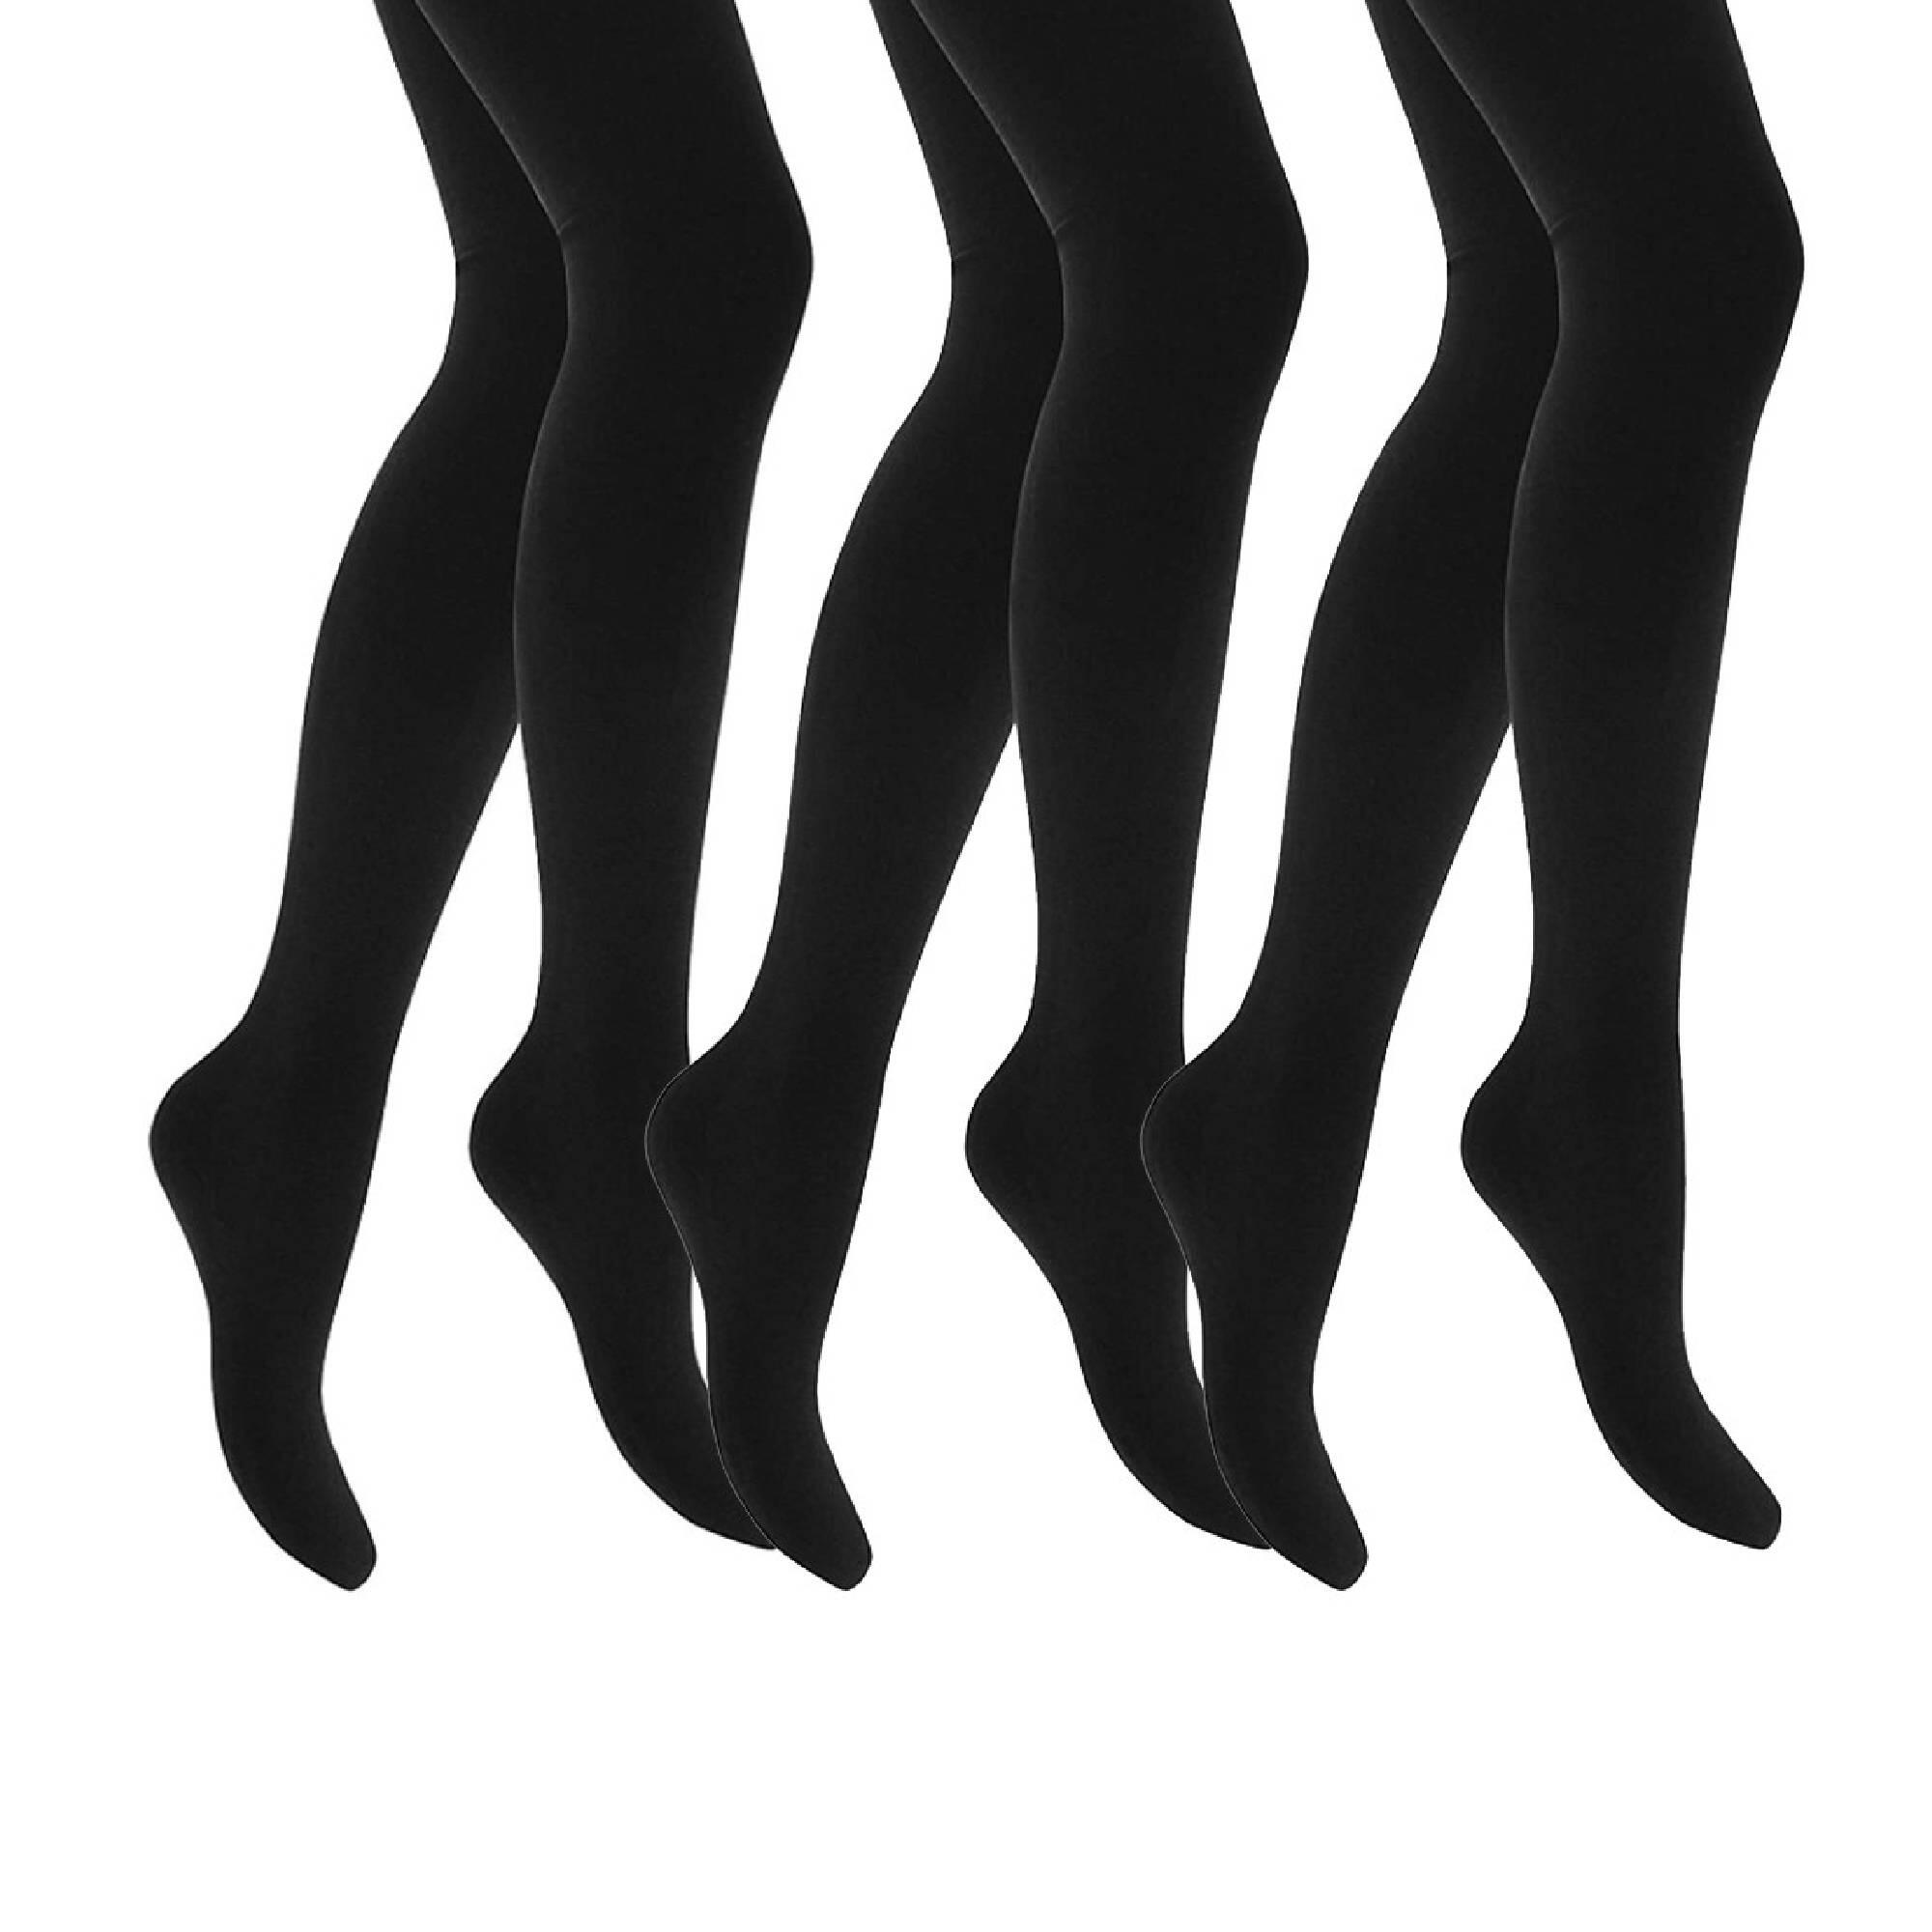 3 Pair Multipack Girls Fleece Lined Opaque Thermal Tights for